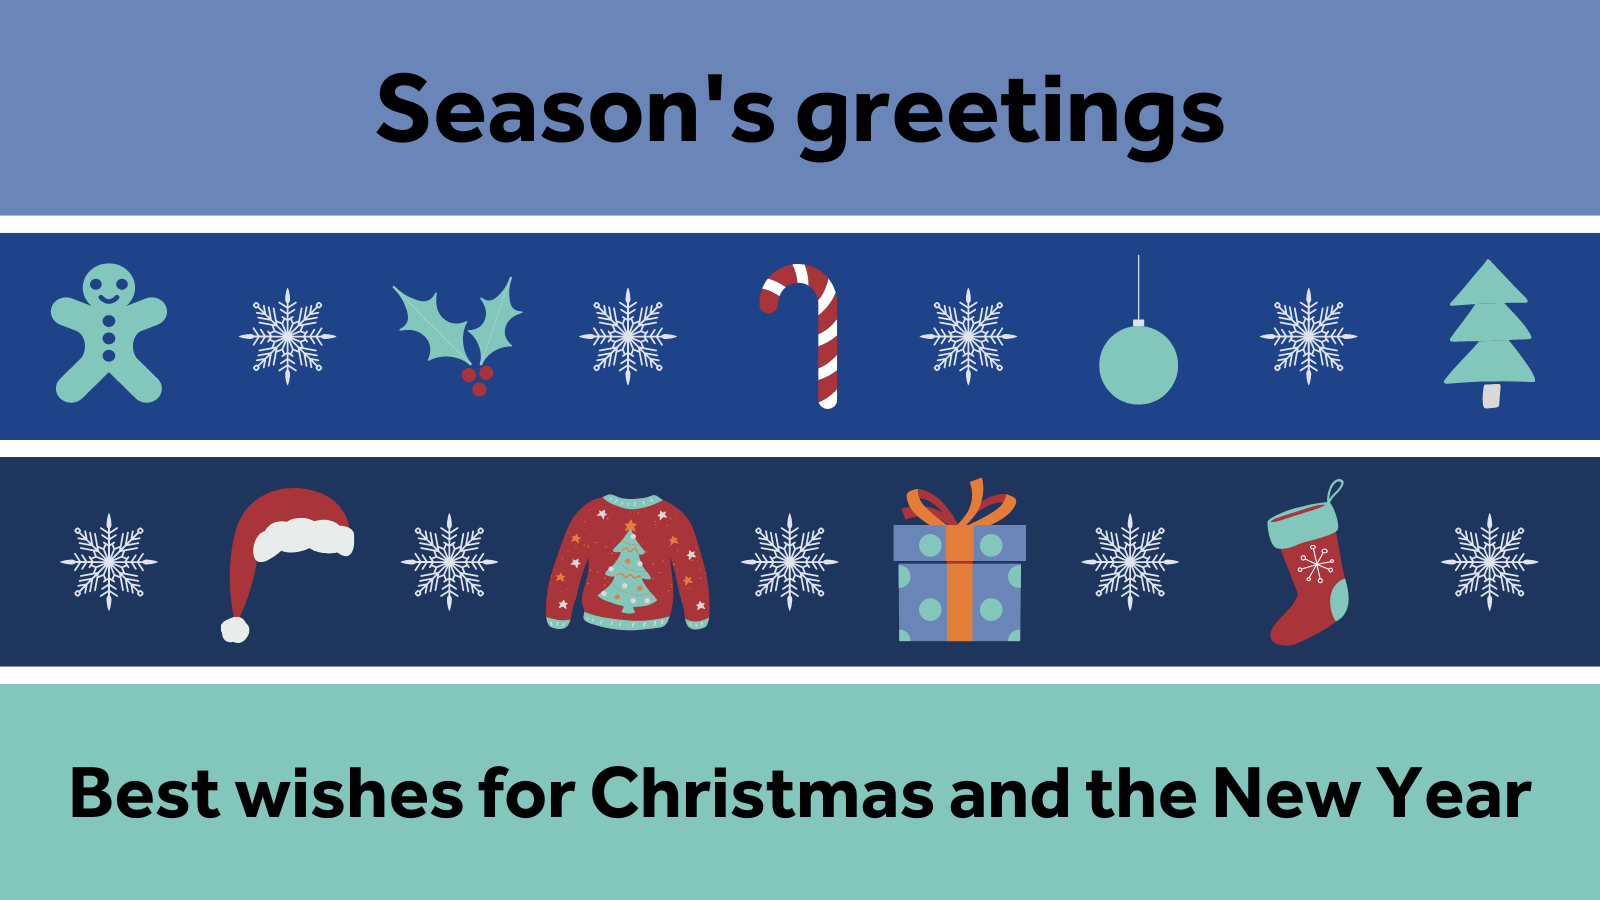 Season's greetings. Best wishes for Christmas and the New Year.